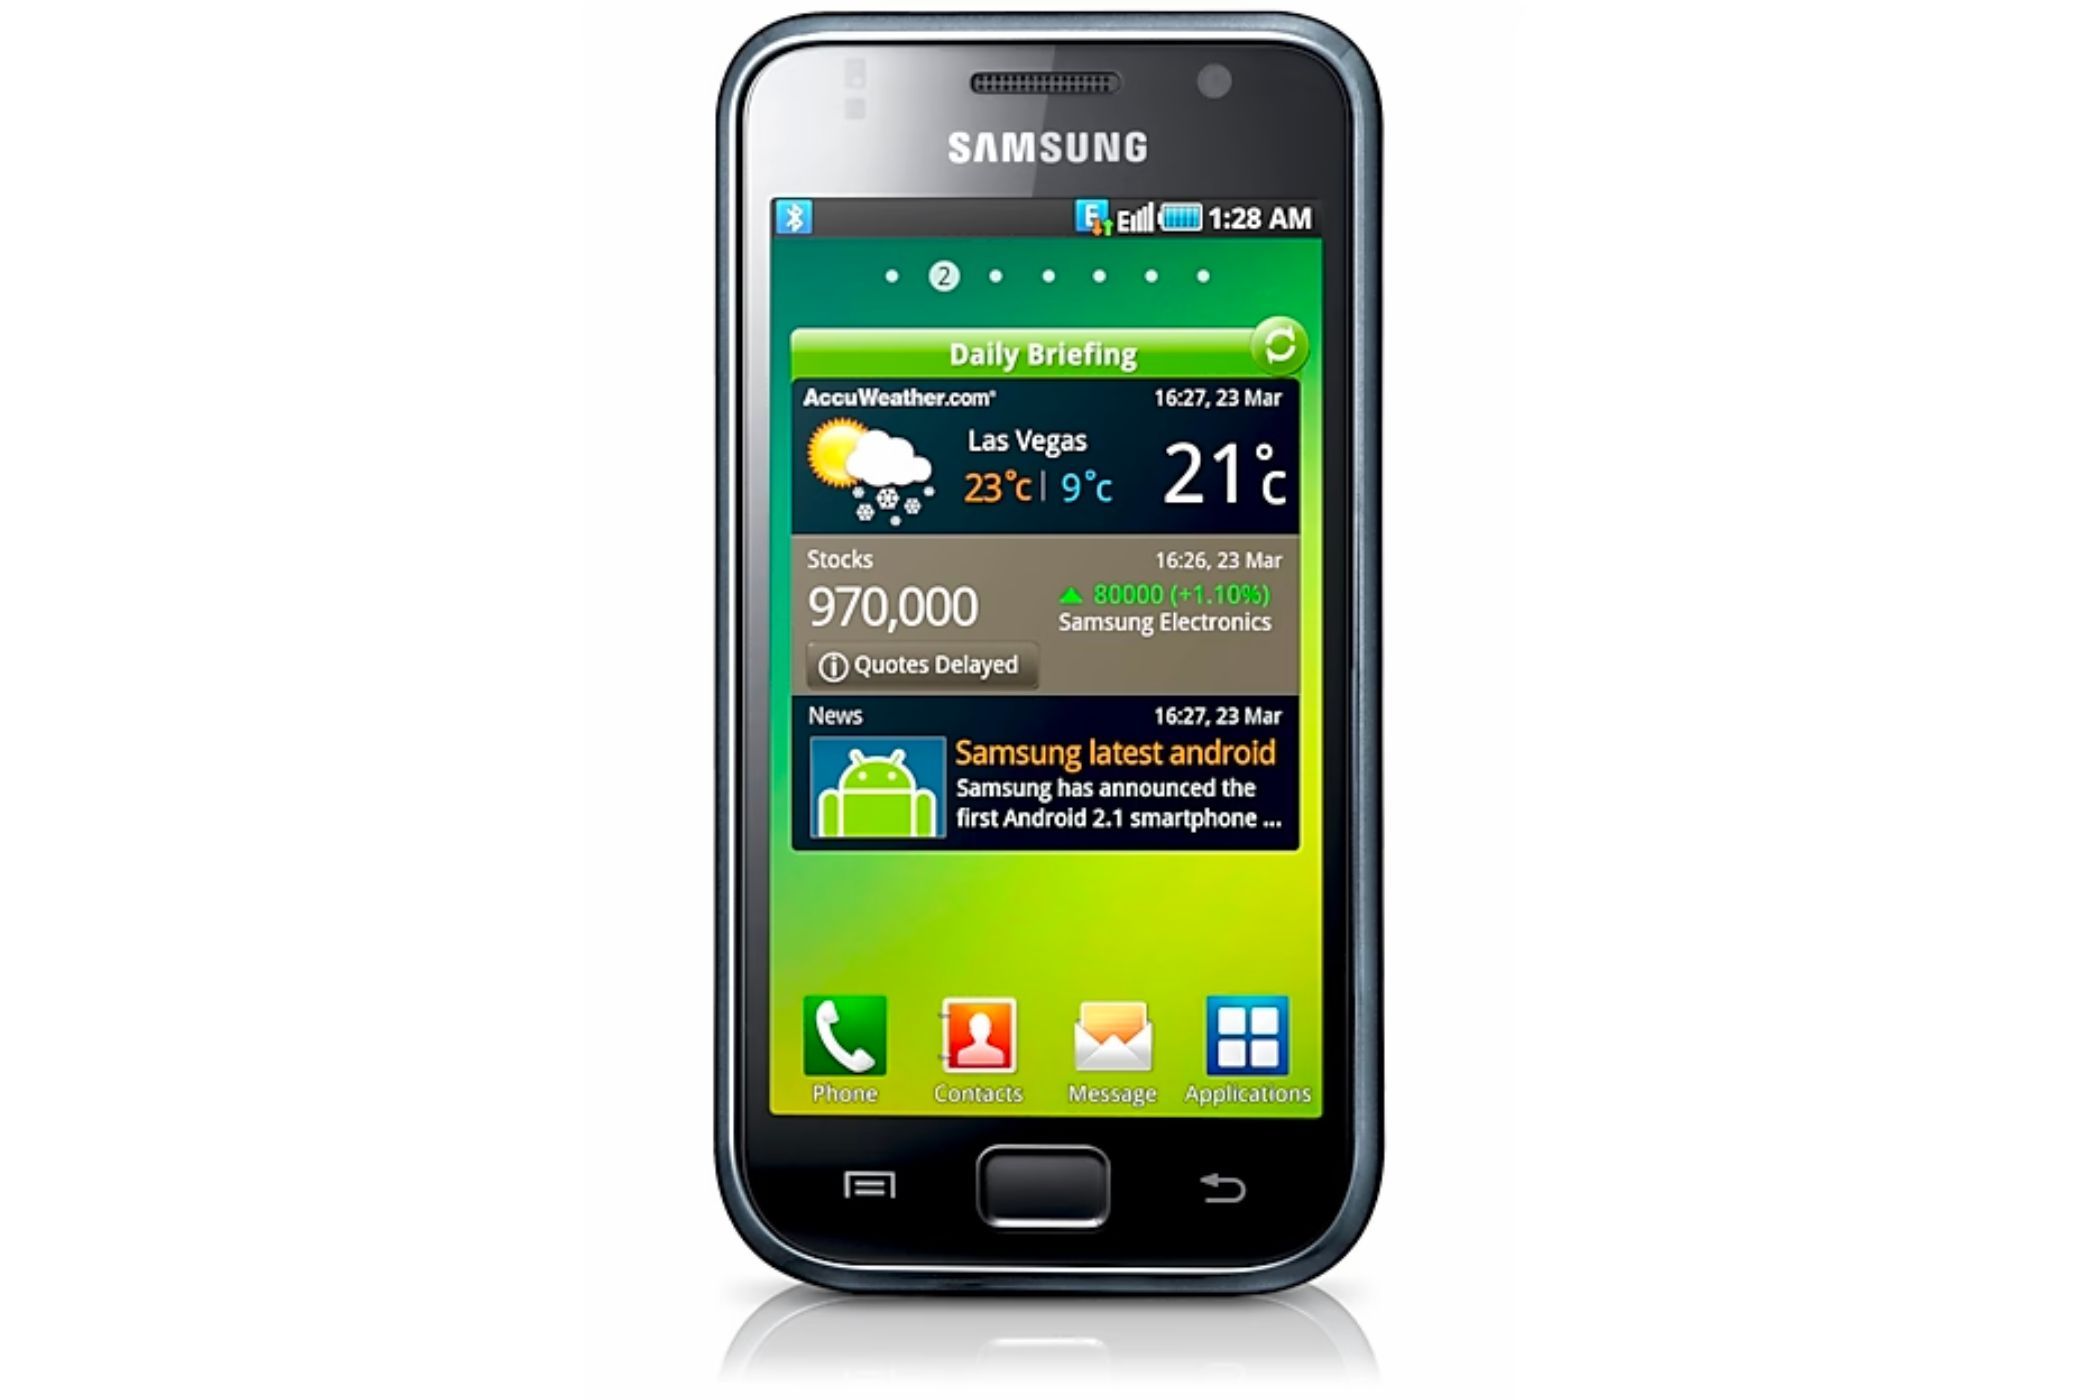 A render of the original Samsung Galaxy S from 2010.